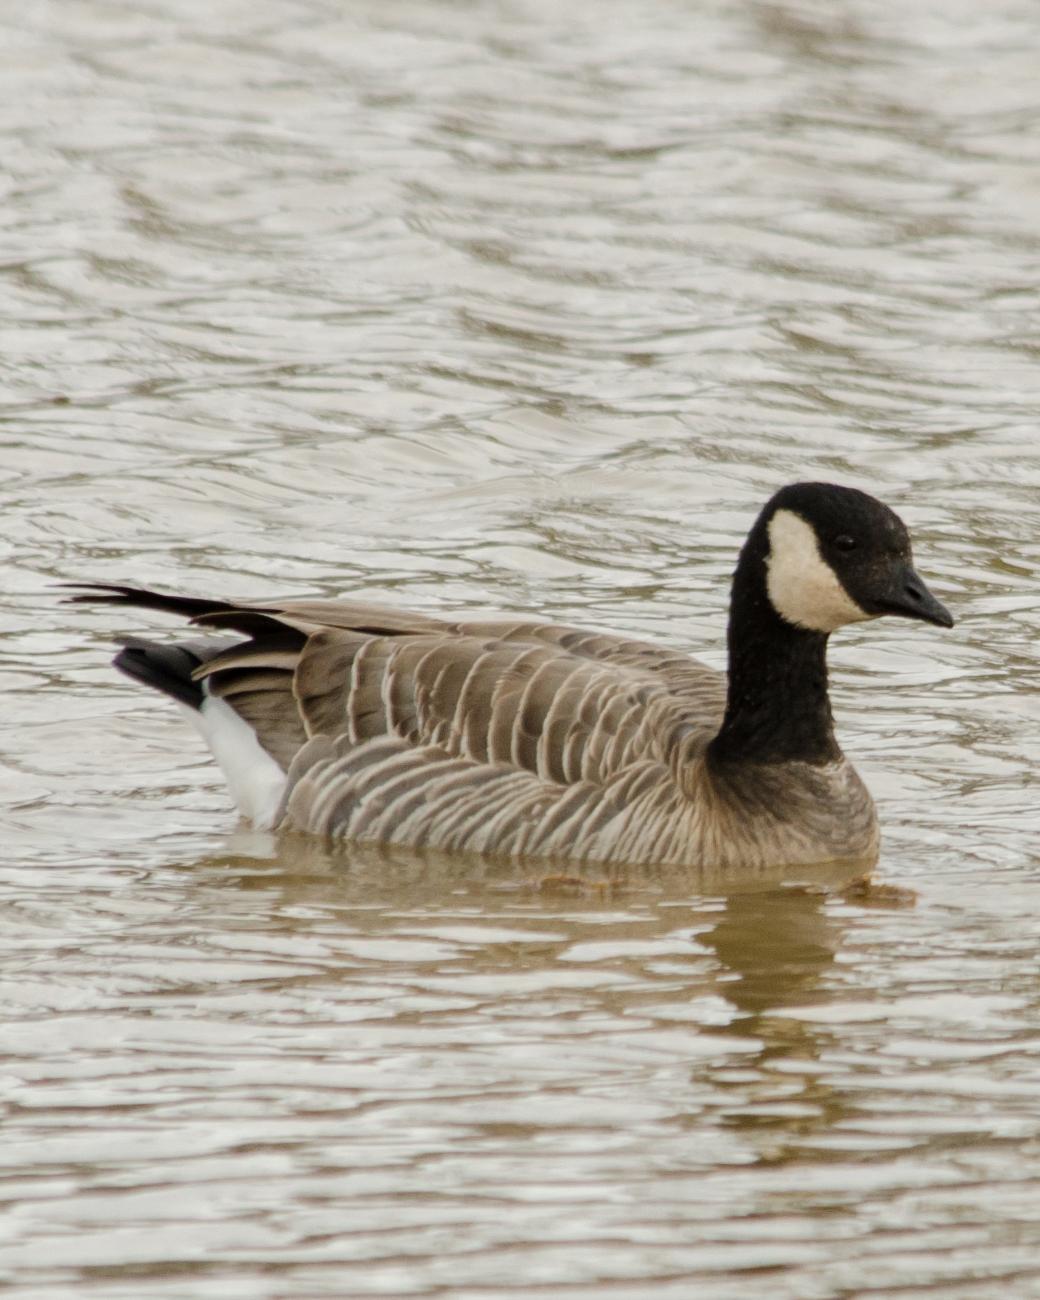 Cackling Goose Photo by Susie Nishio